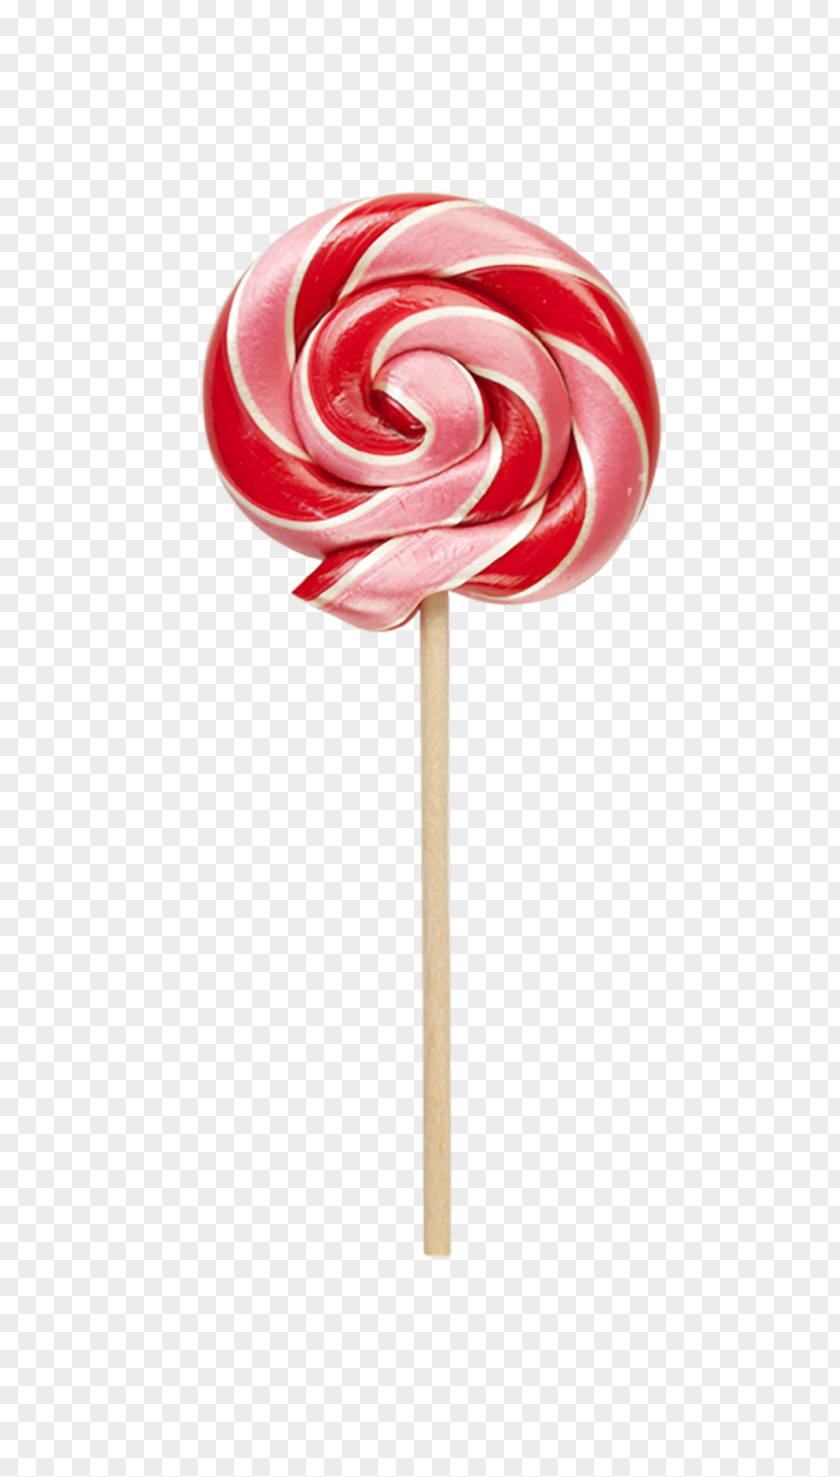 Magenta Food Lollipop Stick Candy Pink Confectionery PNG